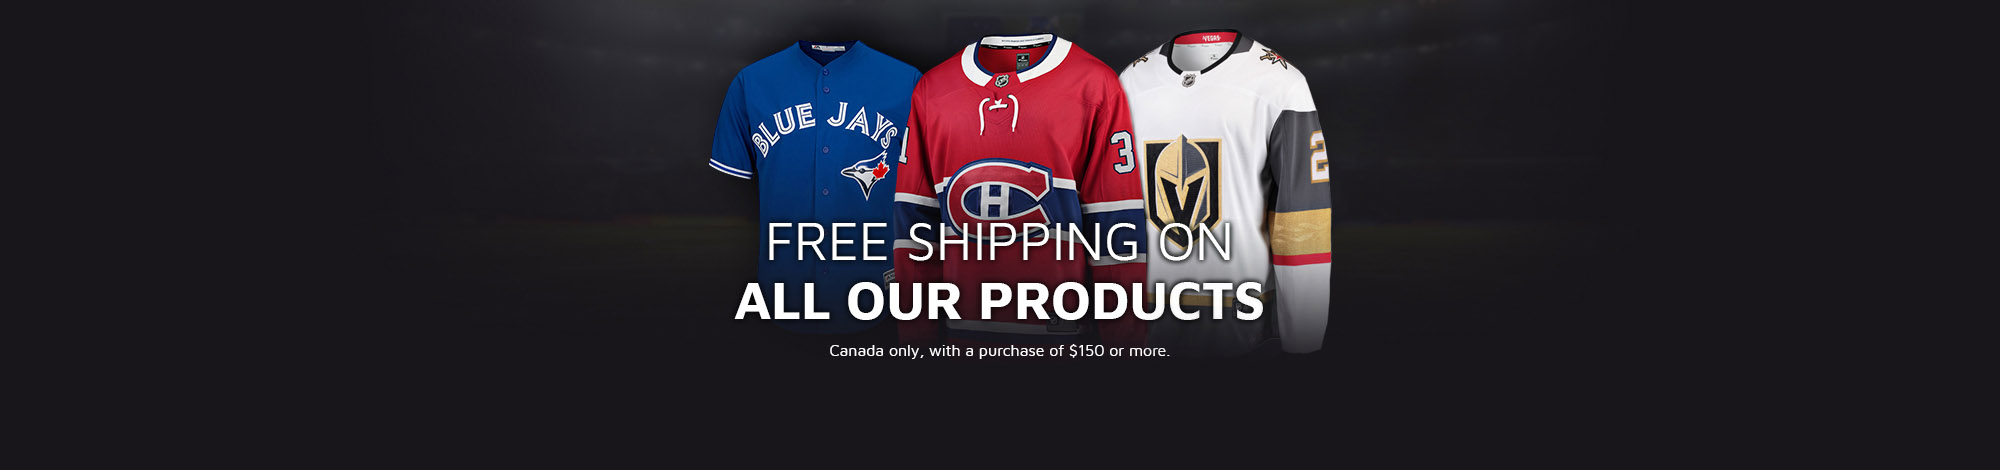 Free shipping in Canada with an order of 150 $ or more